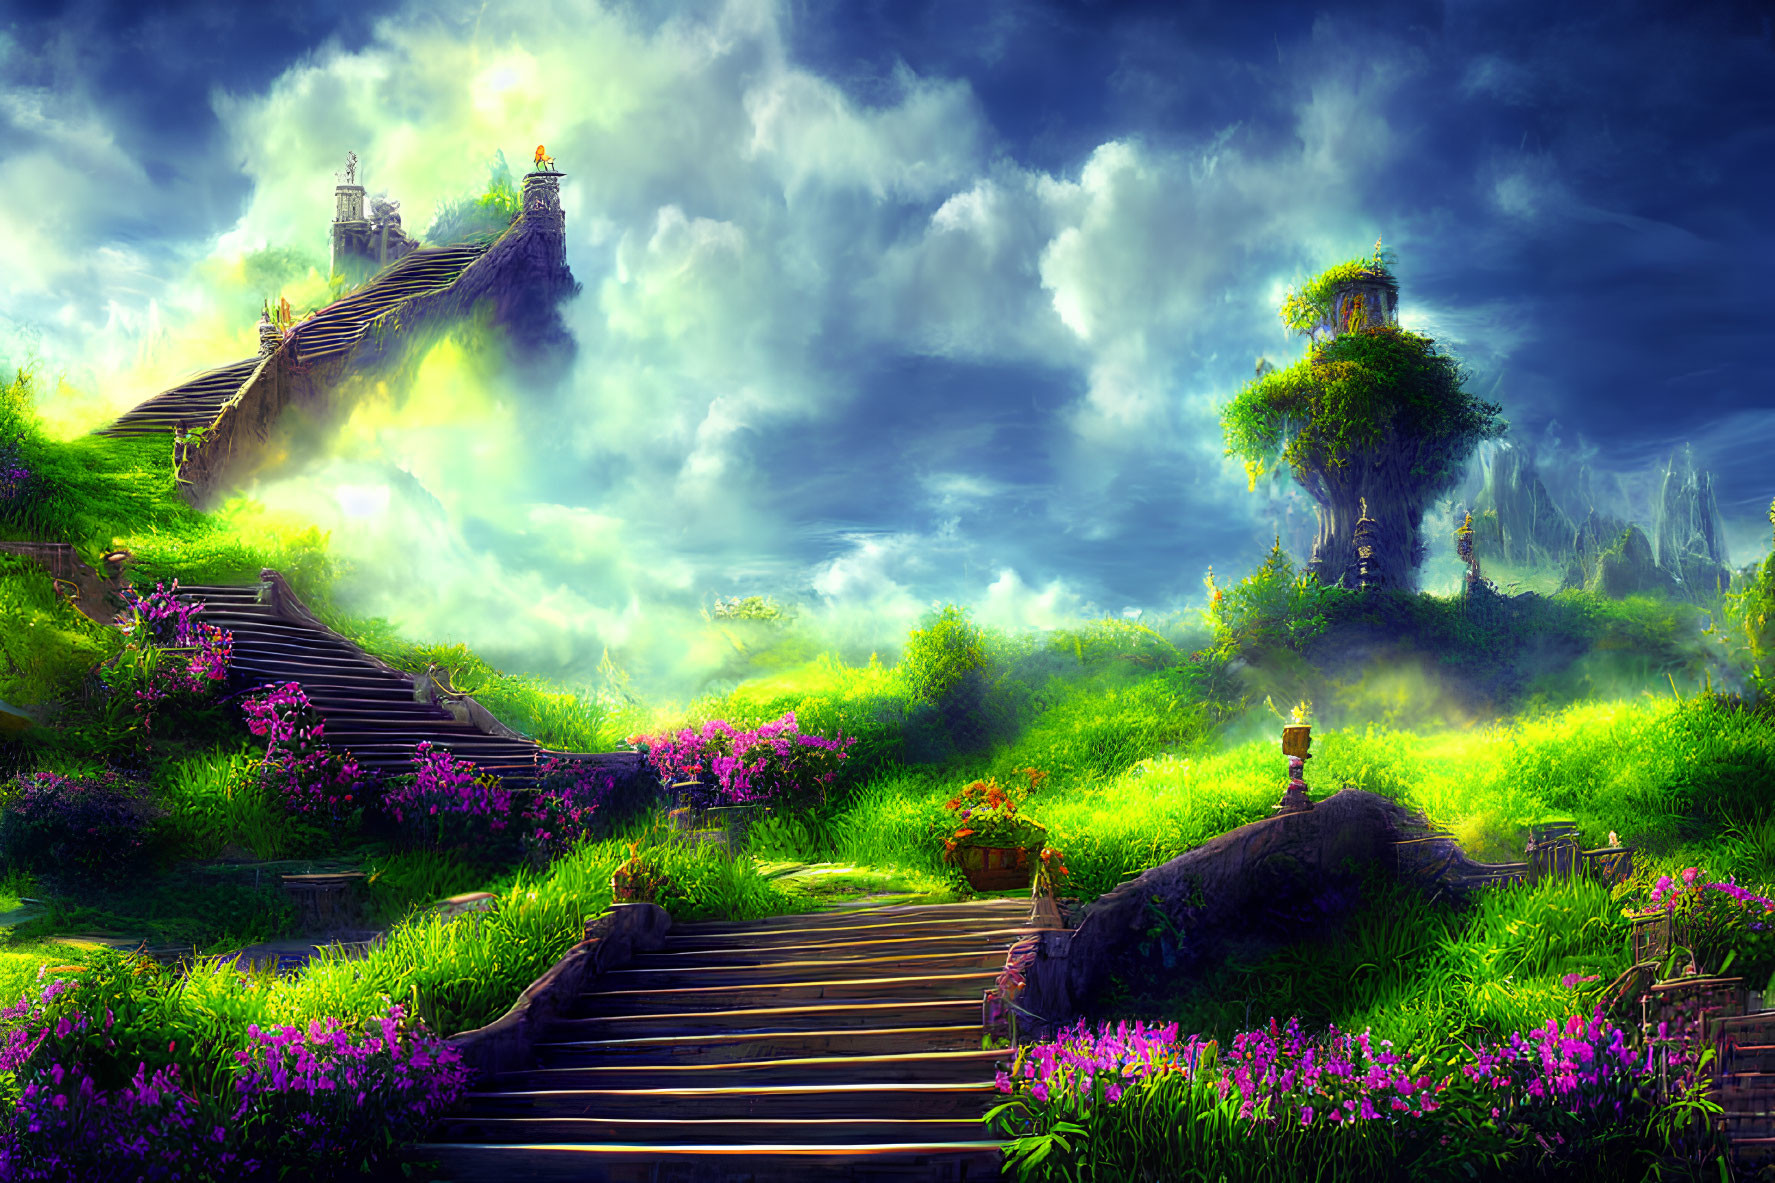 Fantasy landscape with stone staircase, castle, lush hill, greenery, flowers, dramatic sky